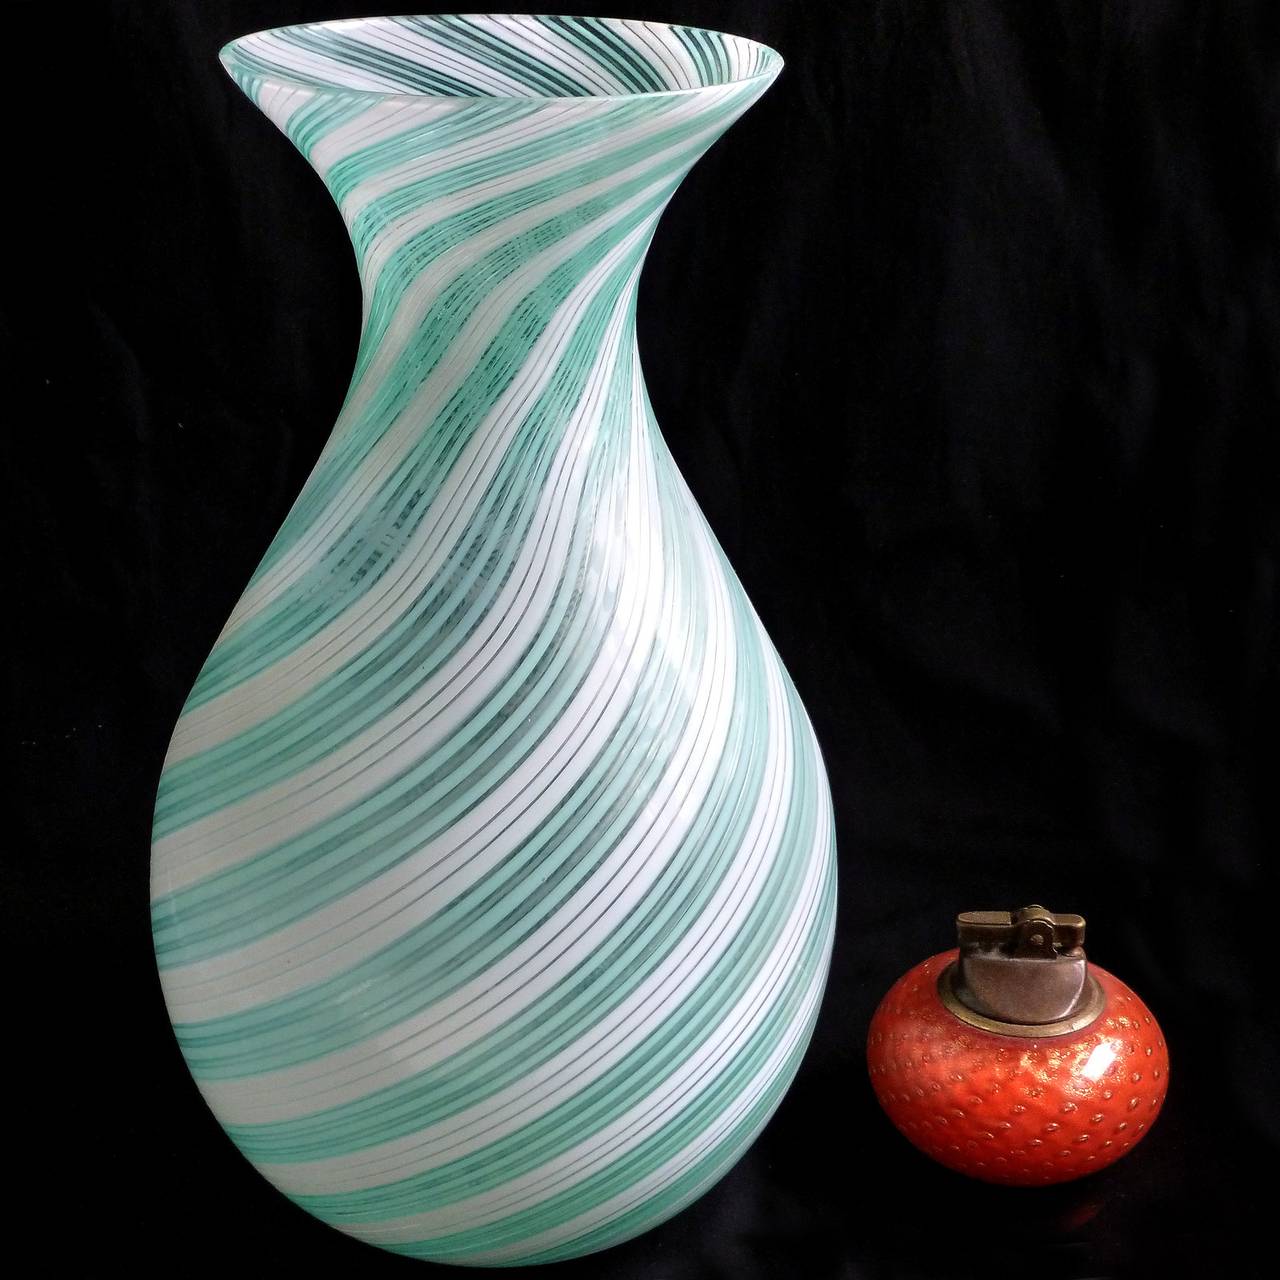 Free shipping worldwide! See details below description.

Large Murano handblown filigrana white and teal blue / green ribbons art glass flower vase. Documented to designer Dino Martens for Aureliano Toso, model # 6050. Great decorative piece! For